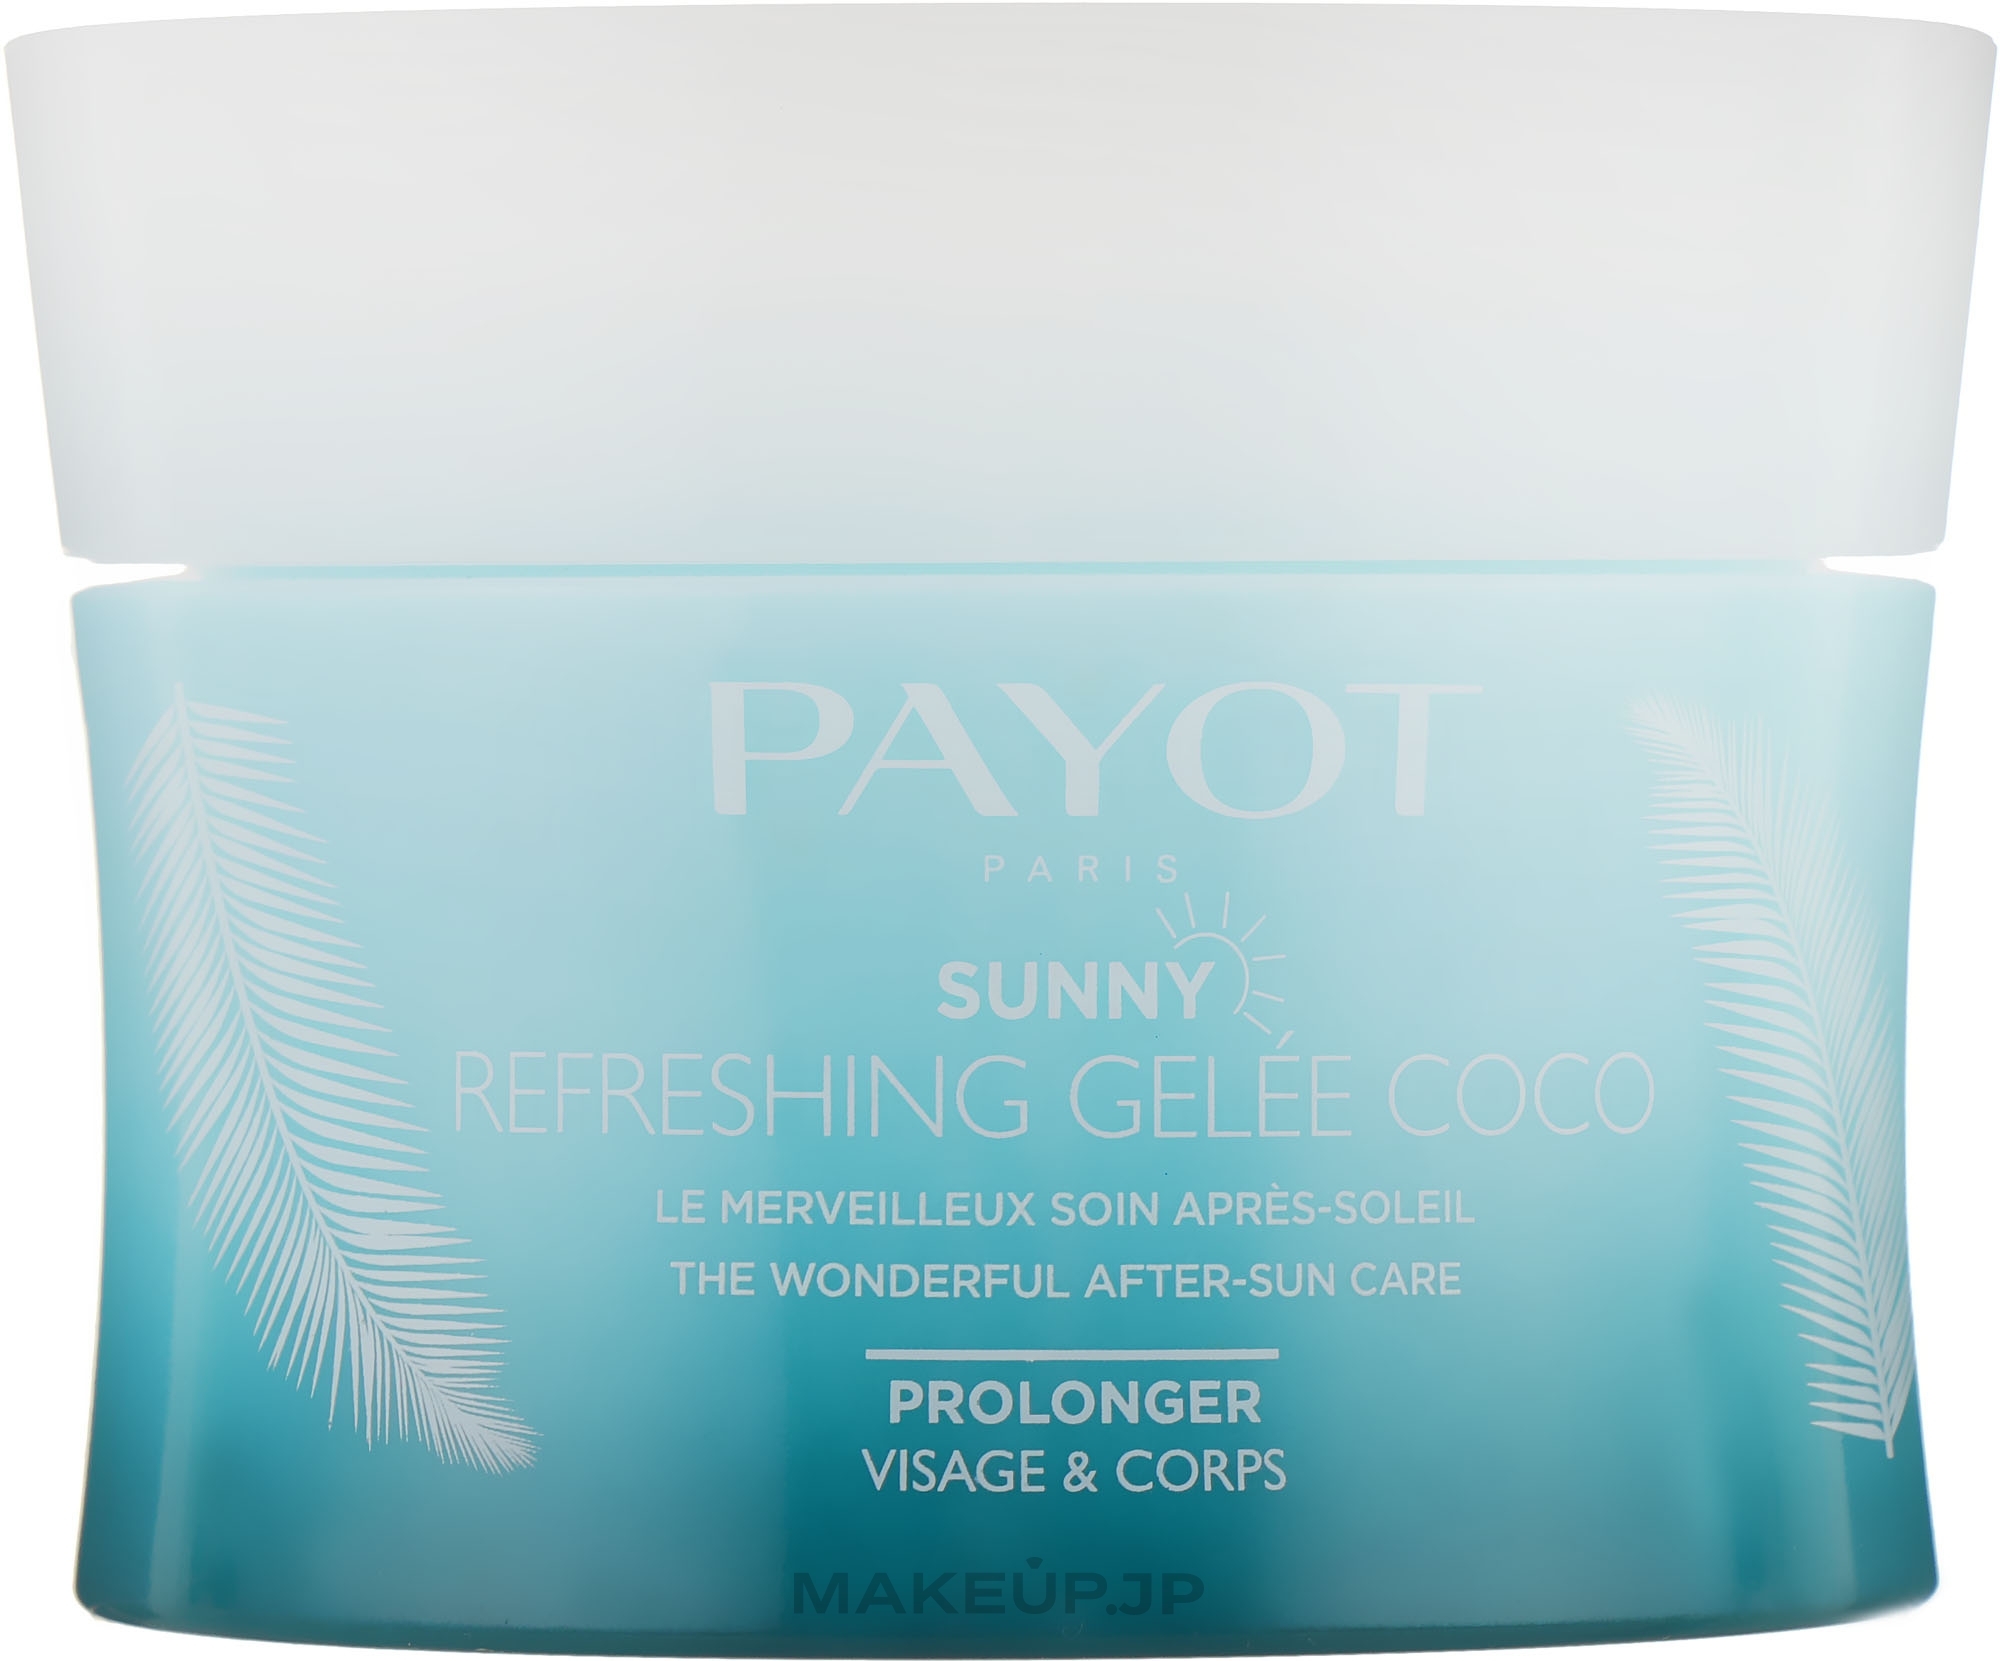 Refreshing Body Jelly - Payot Sunny Payot Refreshing Jelly Coco After-Sun Care — photo 200 ml